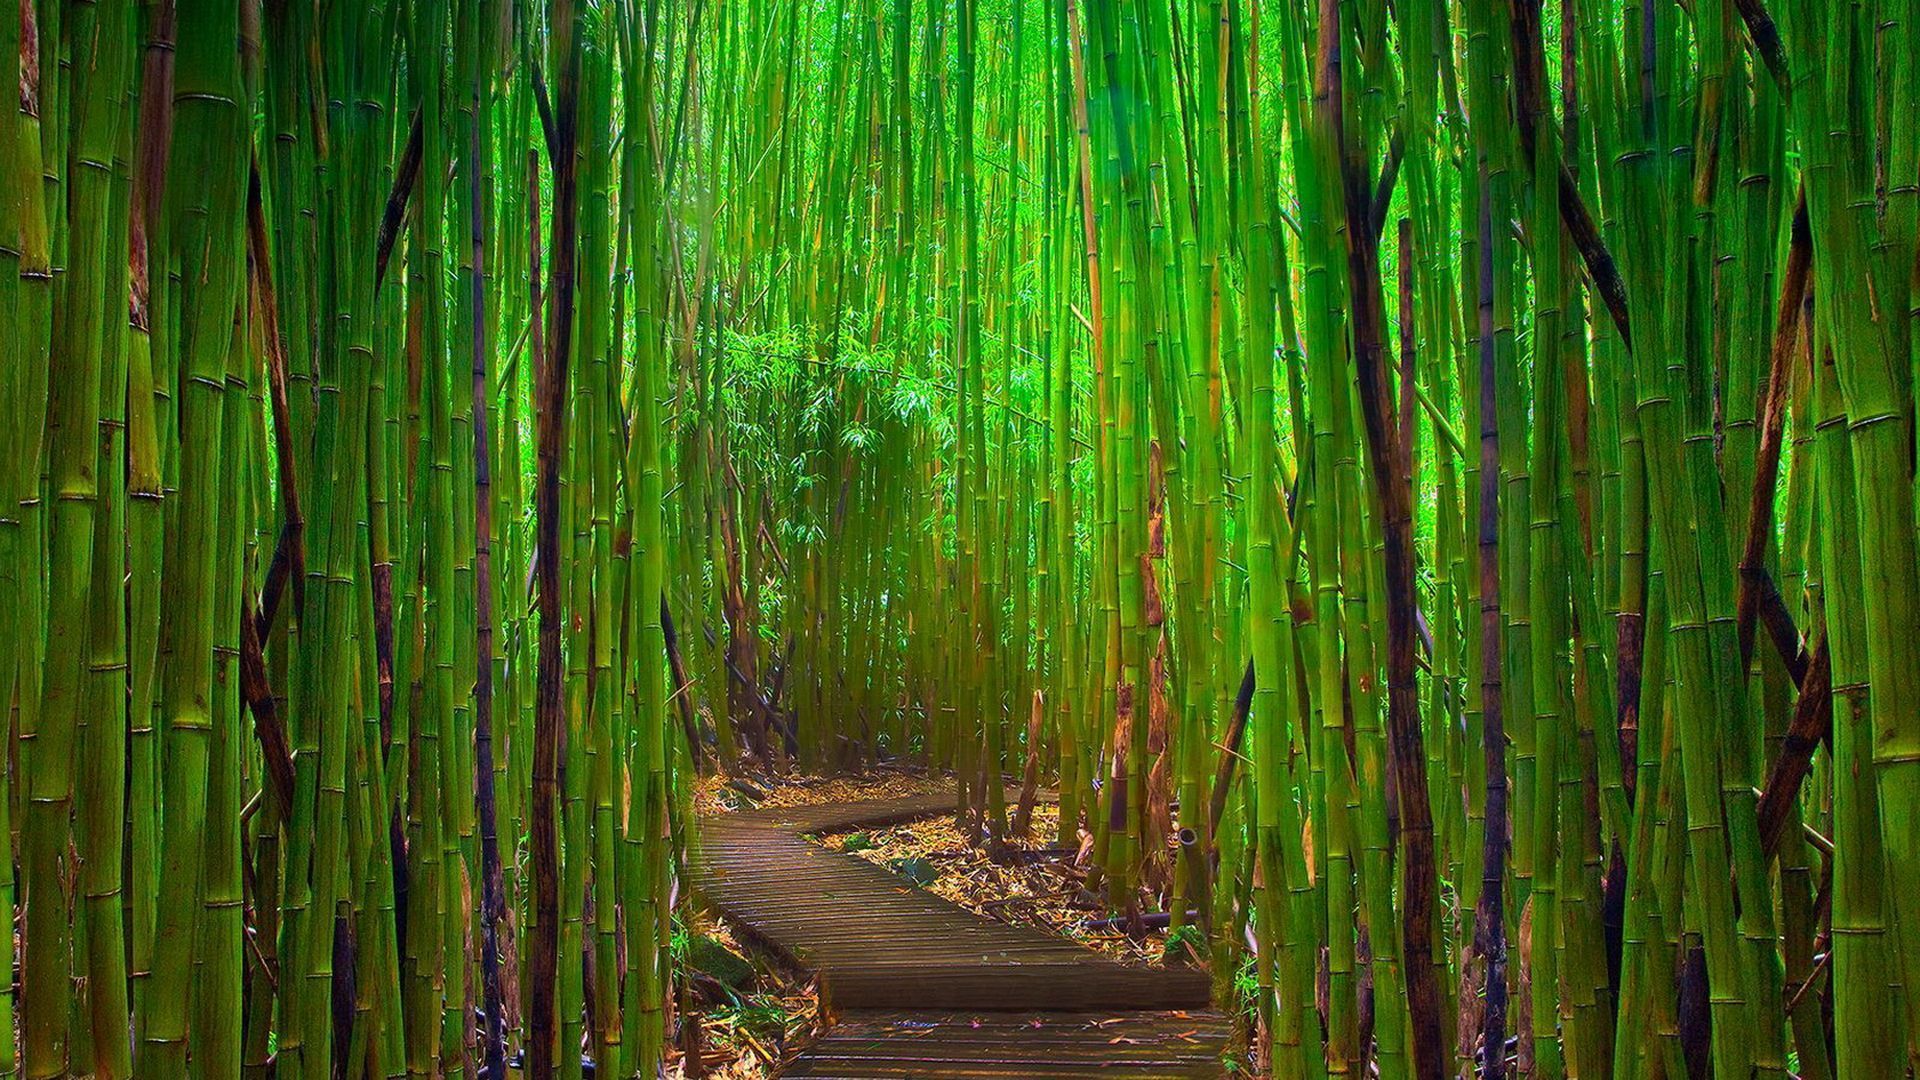 80 Bamboo HD Wallpapers Backgrounds - Wallpaper Abyss